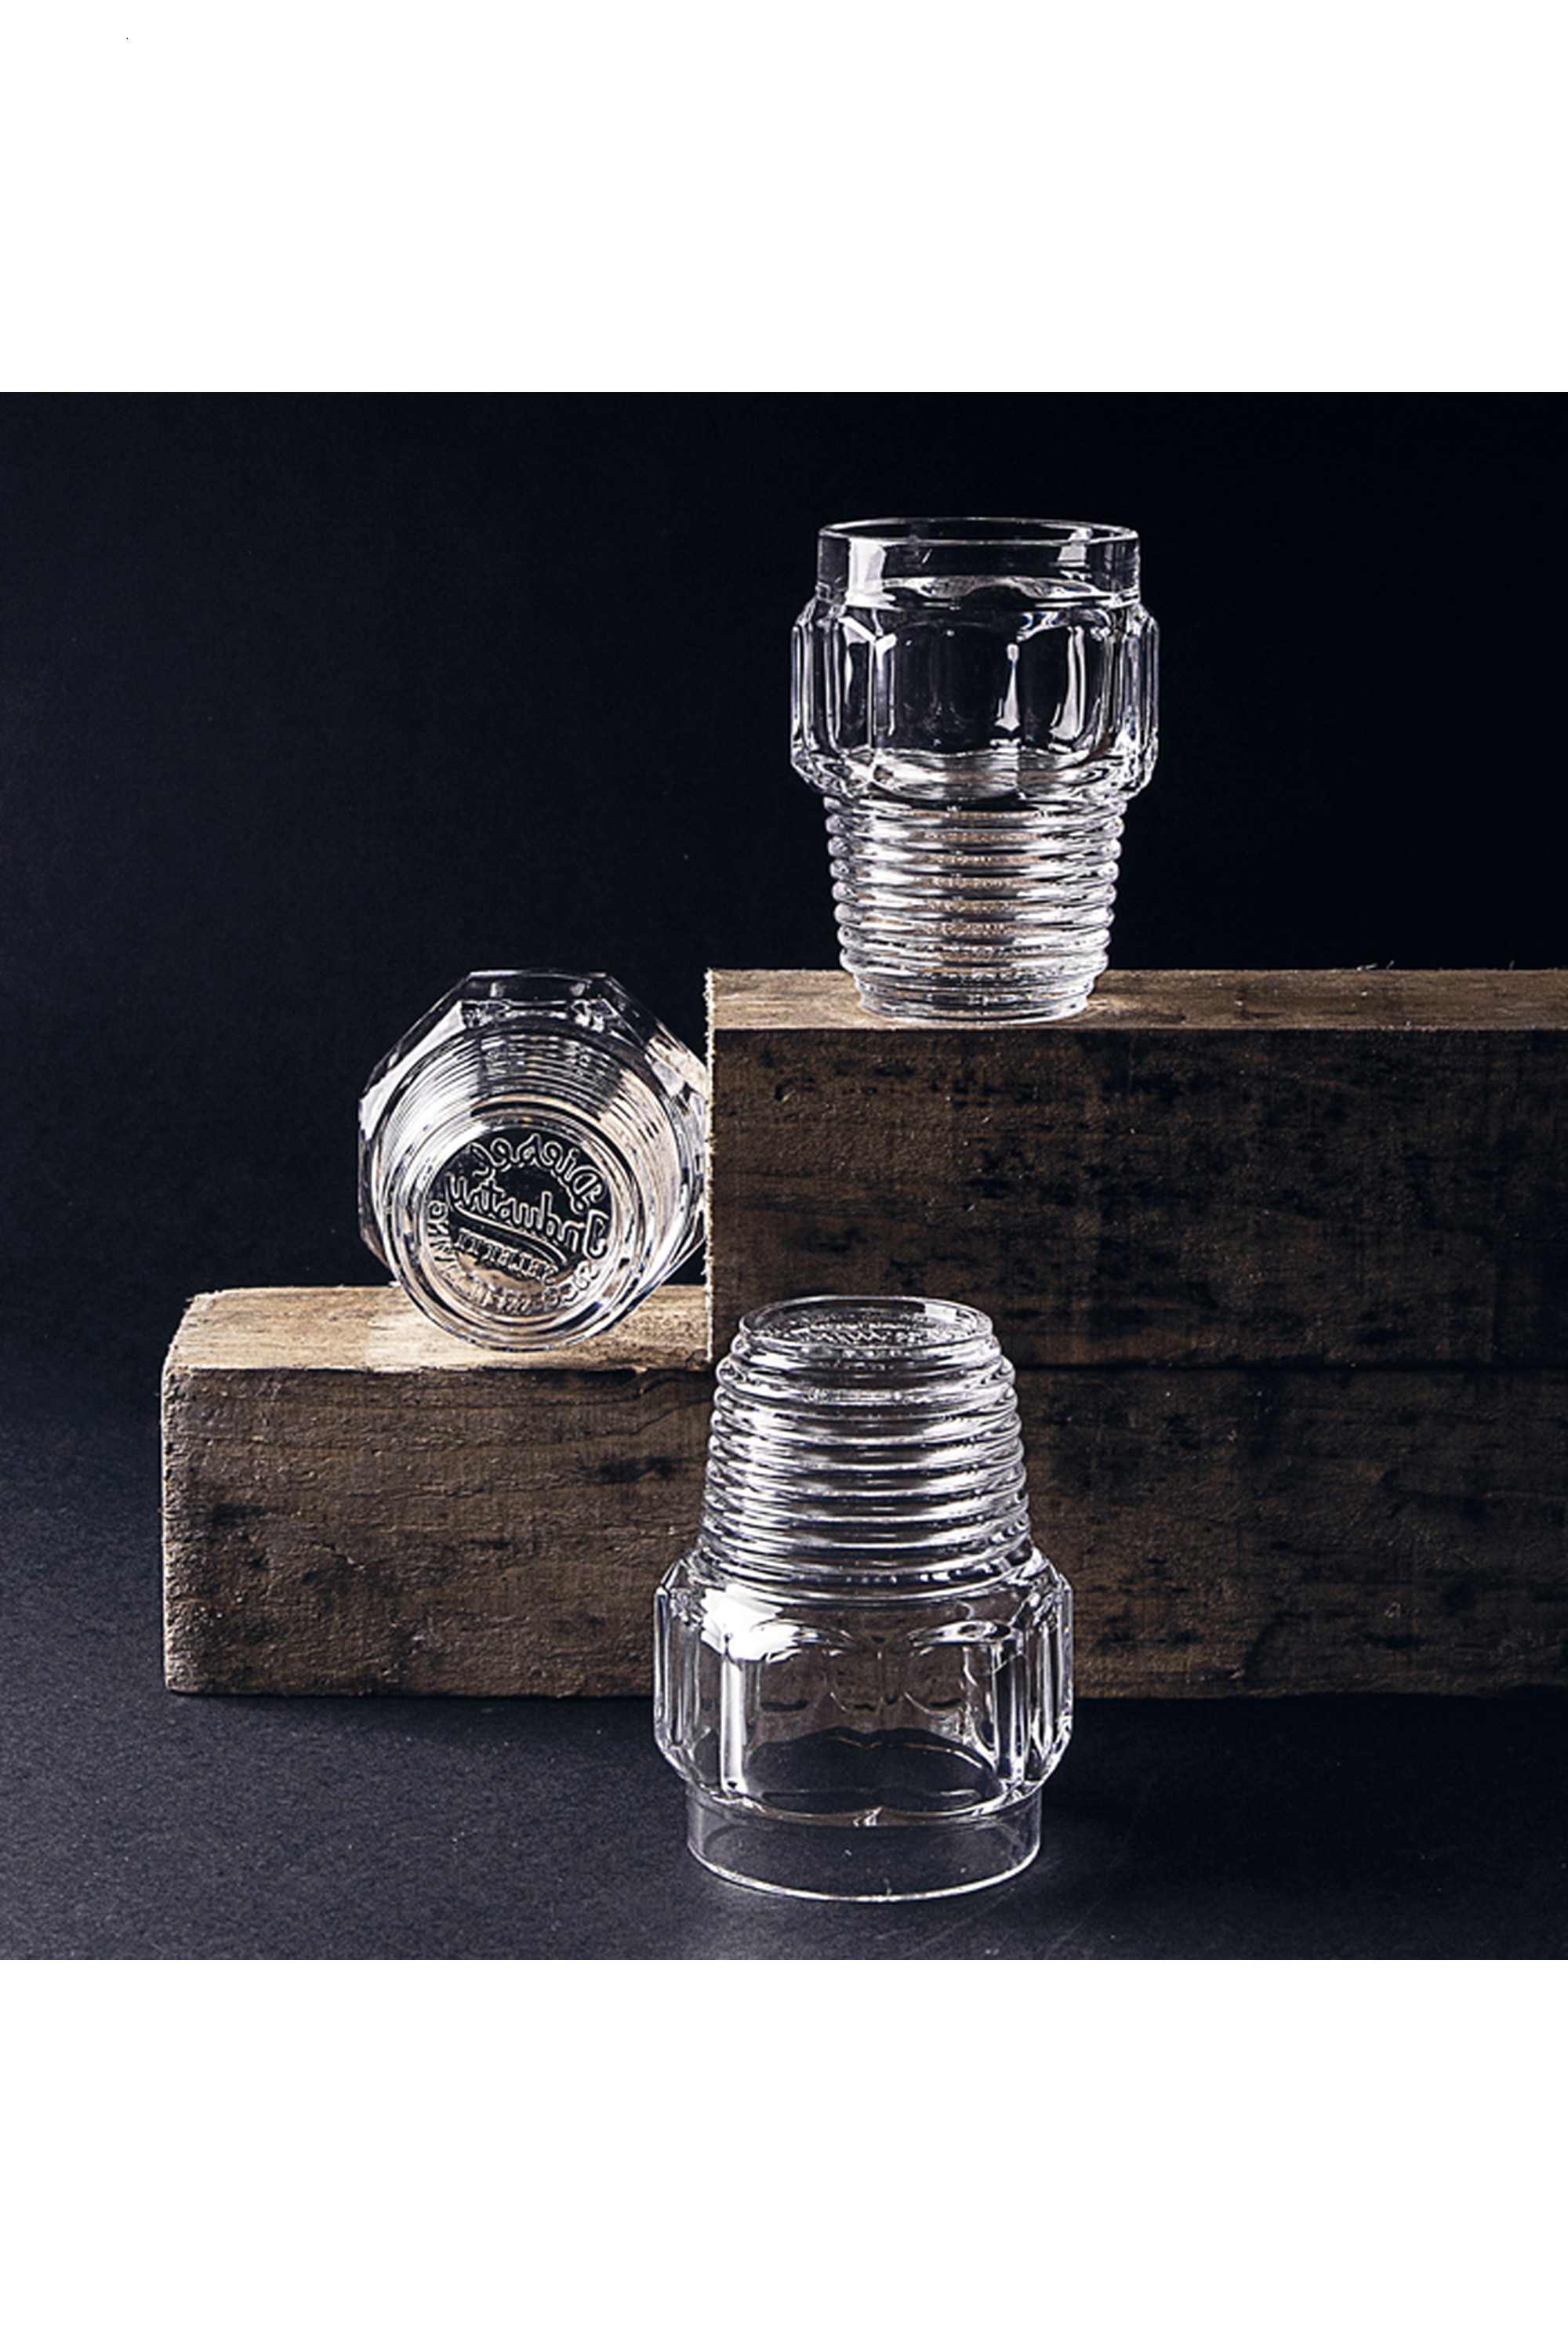 DIESEL LIVING with SELETTI “Drinking Glass Set 3pcs